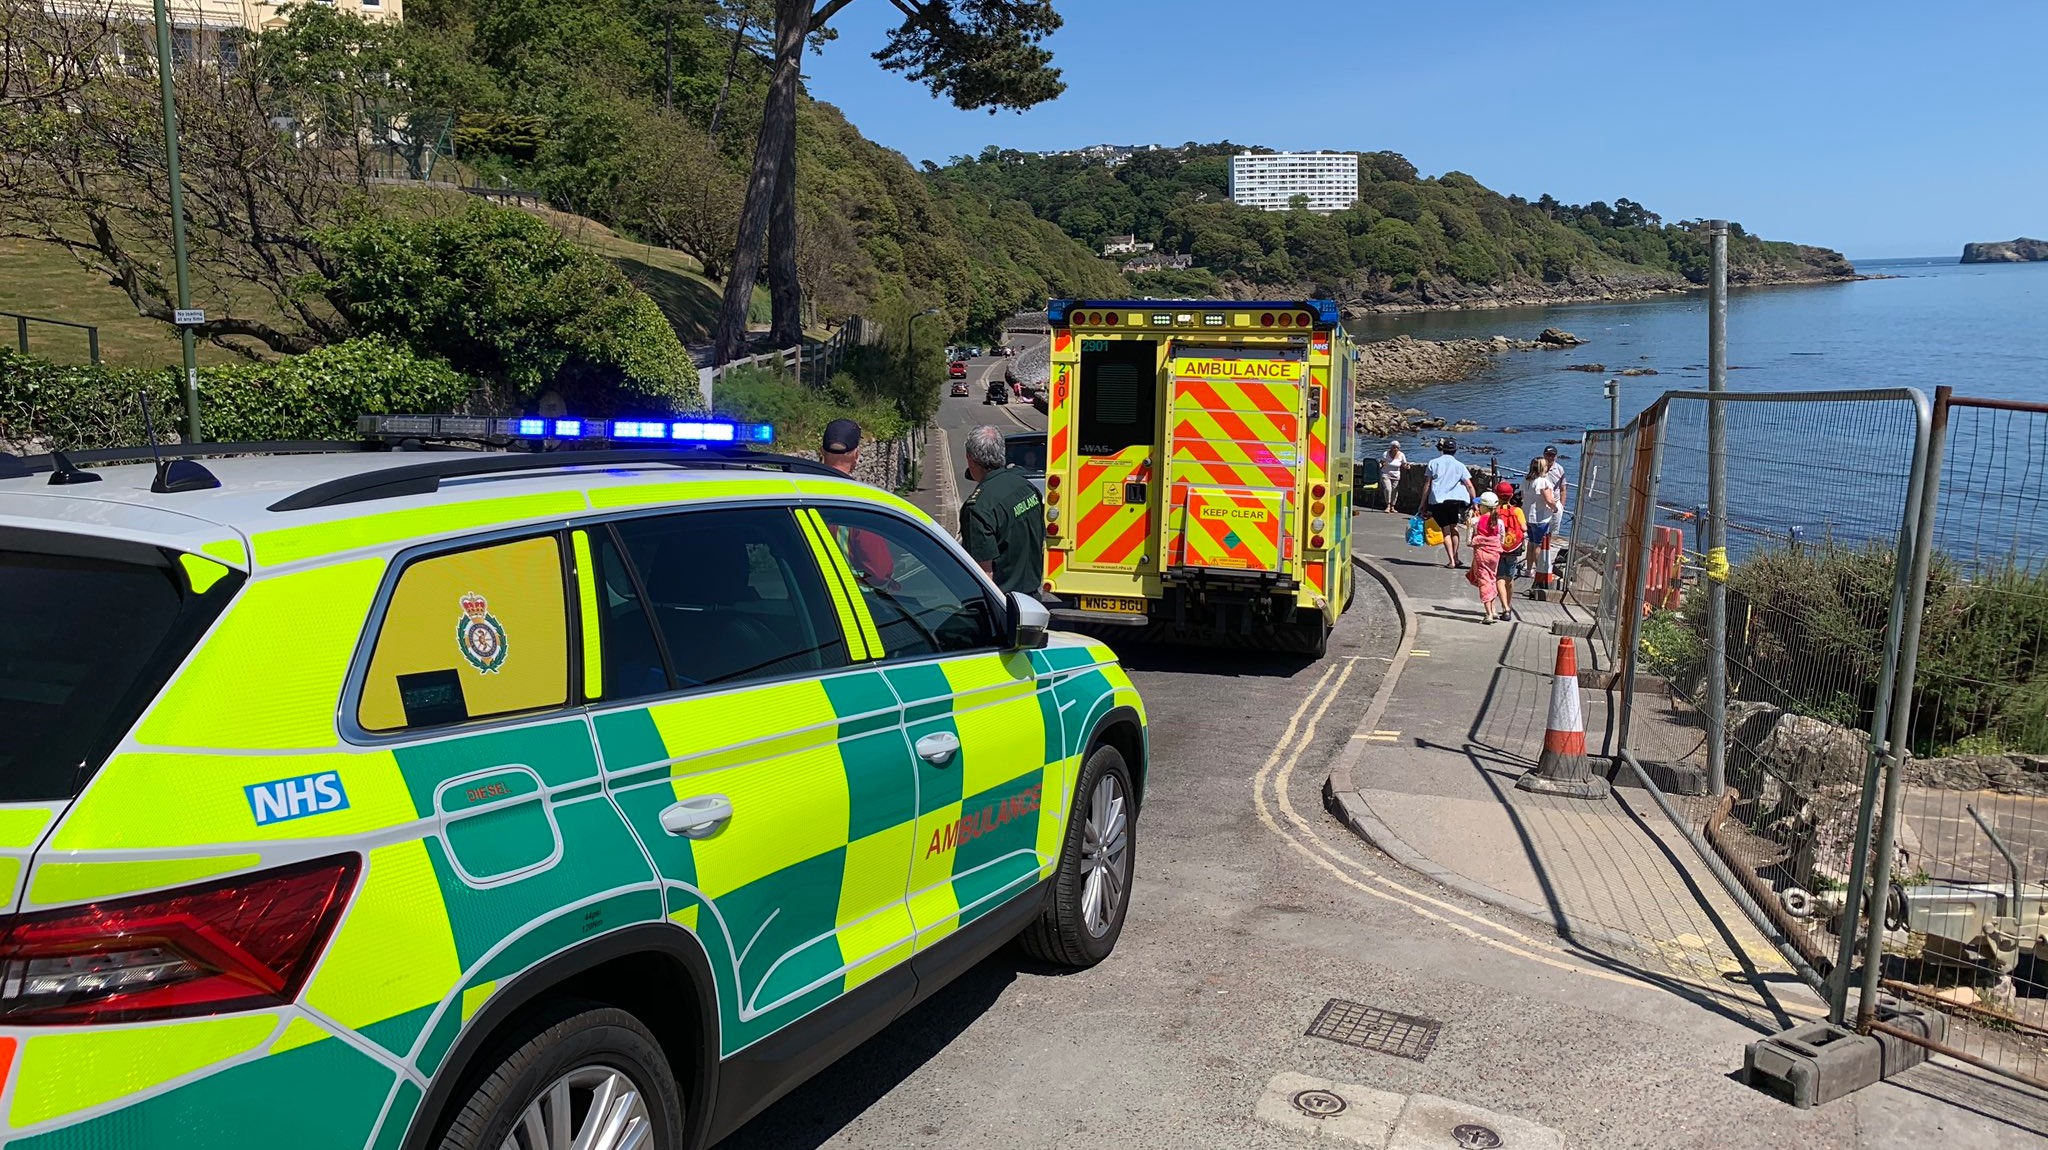 Two-year-old child falls 15ft onto busy beach in Torquay sparking air